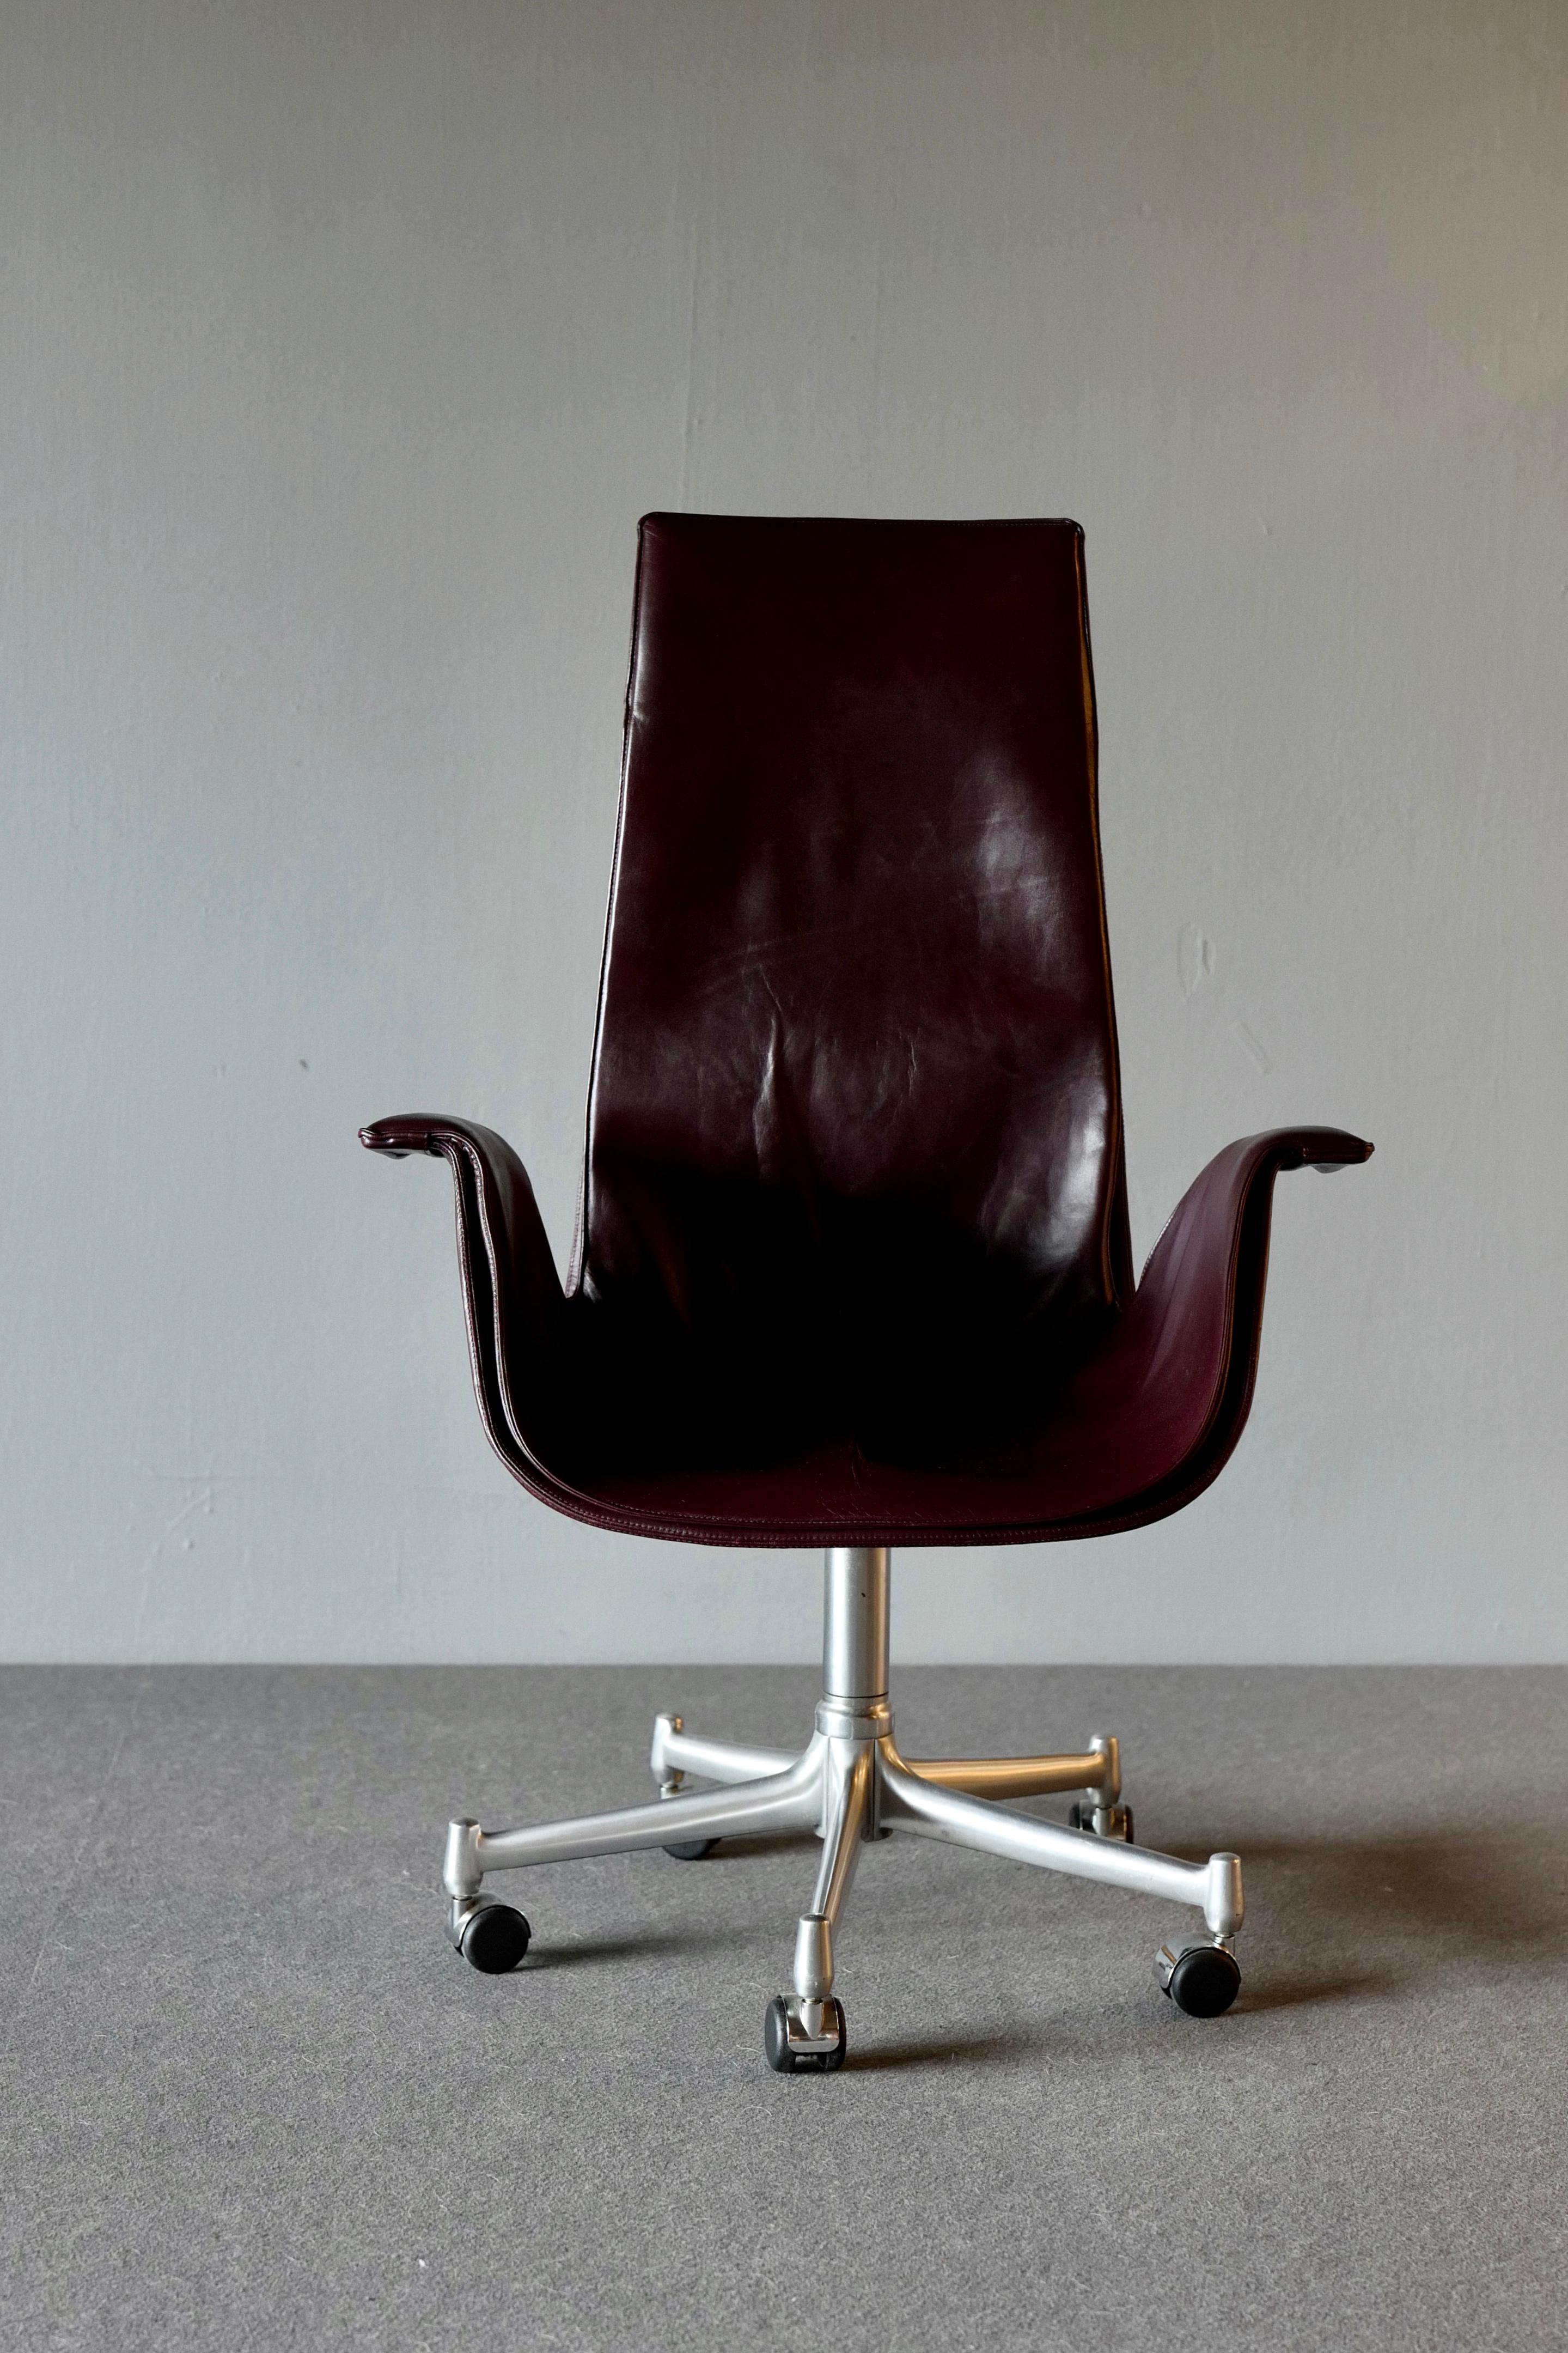 Office chair by Preben Fabricus and Jorgen Kastholm for Kill International. This “Bird” chair or “Tulip” chair is a gorgeous bucket armchair fabricated from a fiberglass shell encased in well patinated brown leather. It has a 5 star central foot in